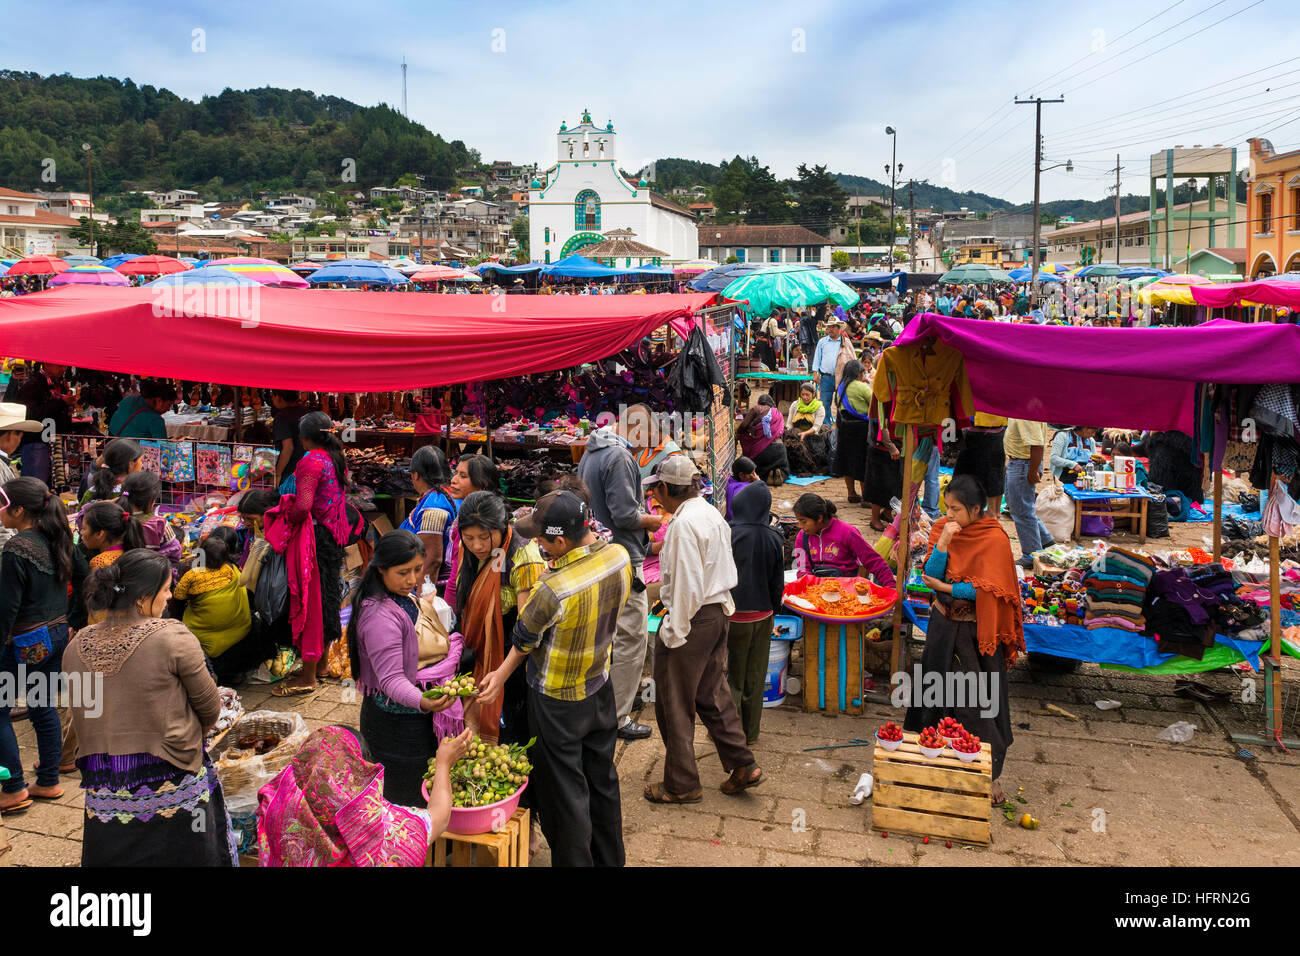 San Juan Chamula - May 11, 2014: Local people in a street market in the town of San Juan Chamula, Chiapas, Mexico Stock Photo